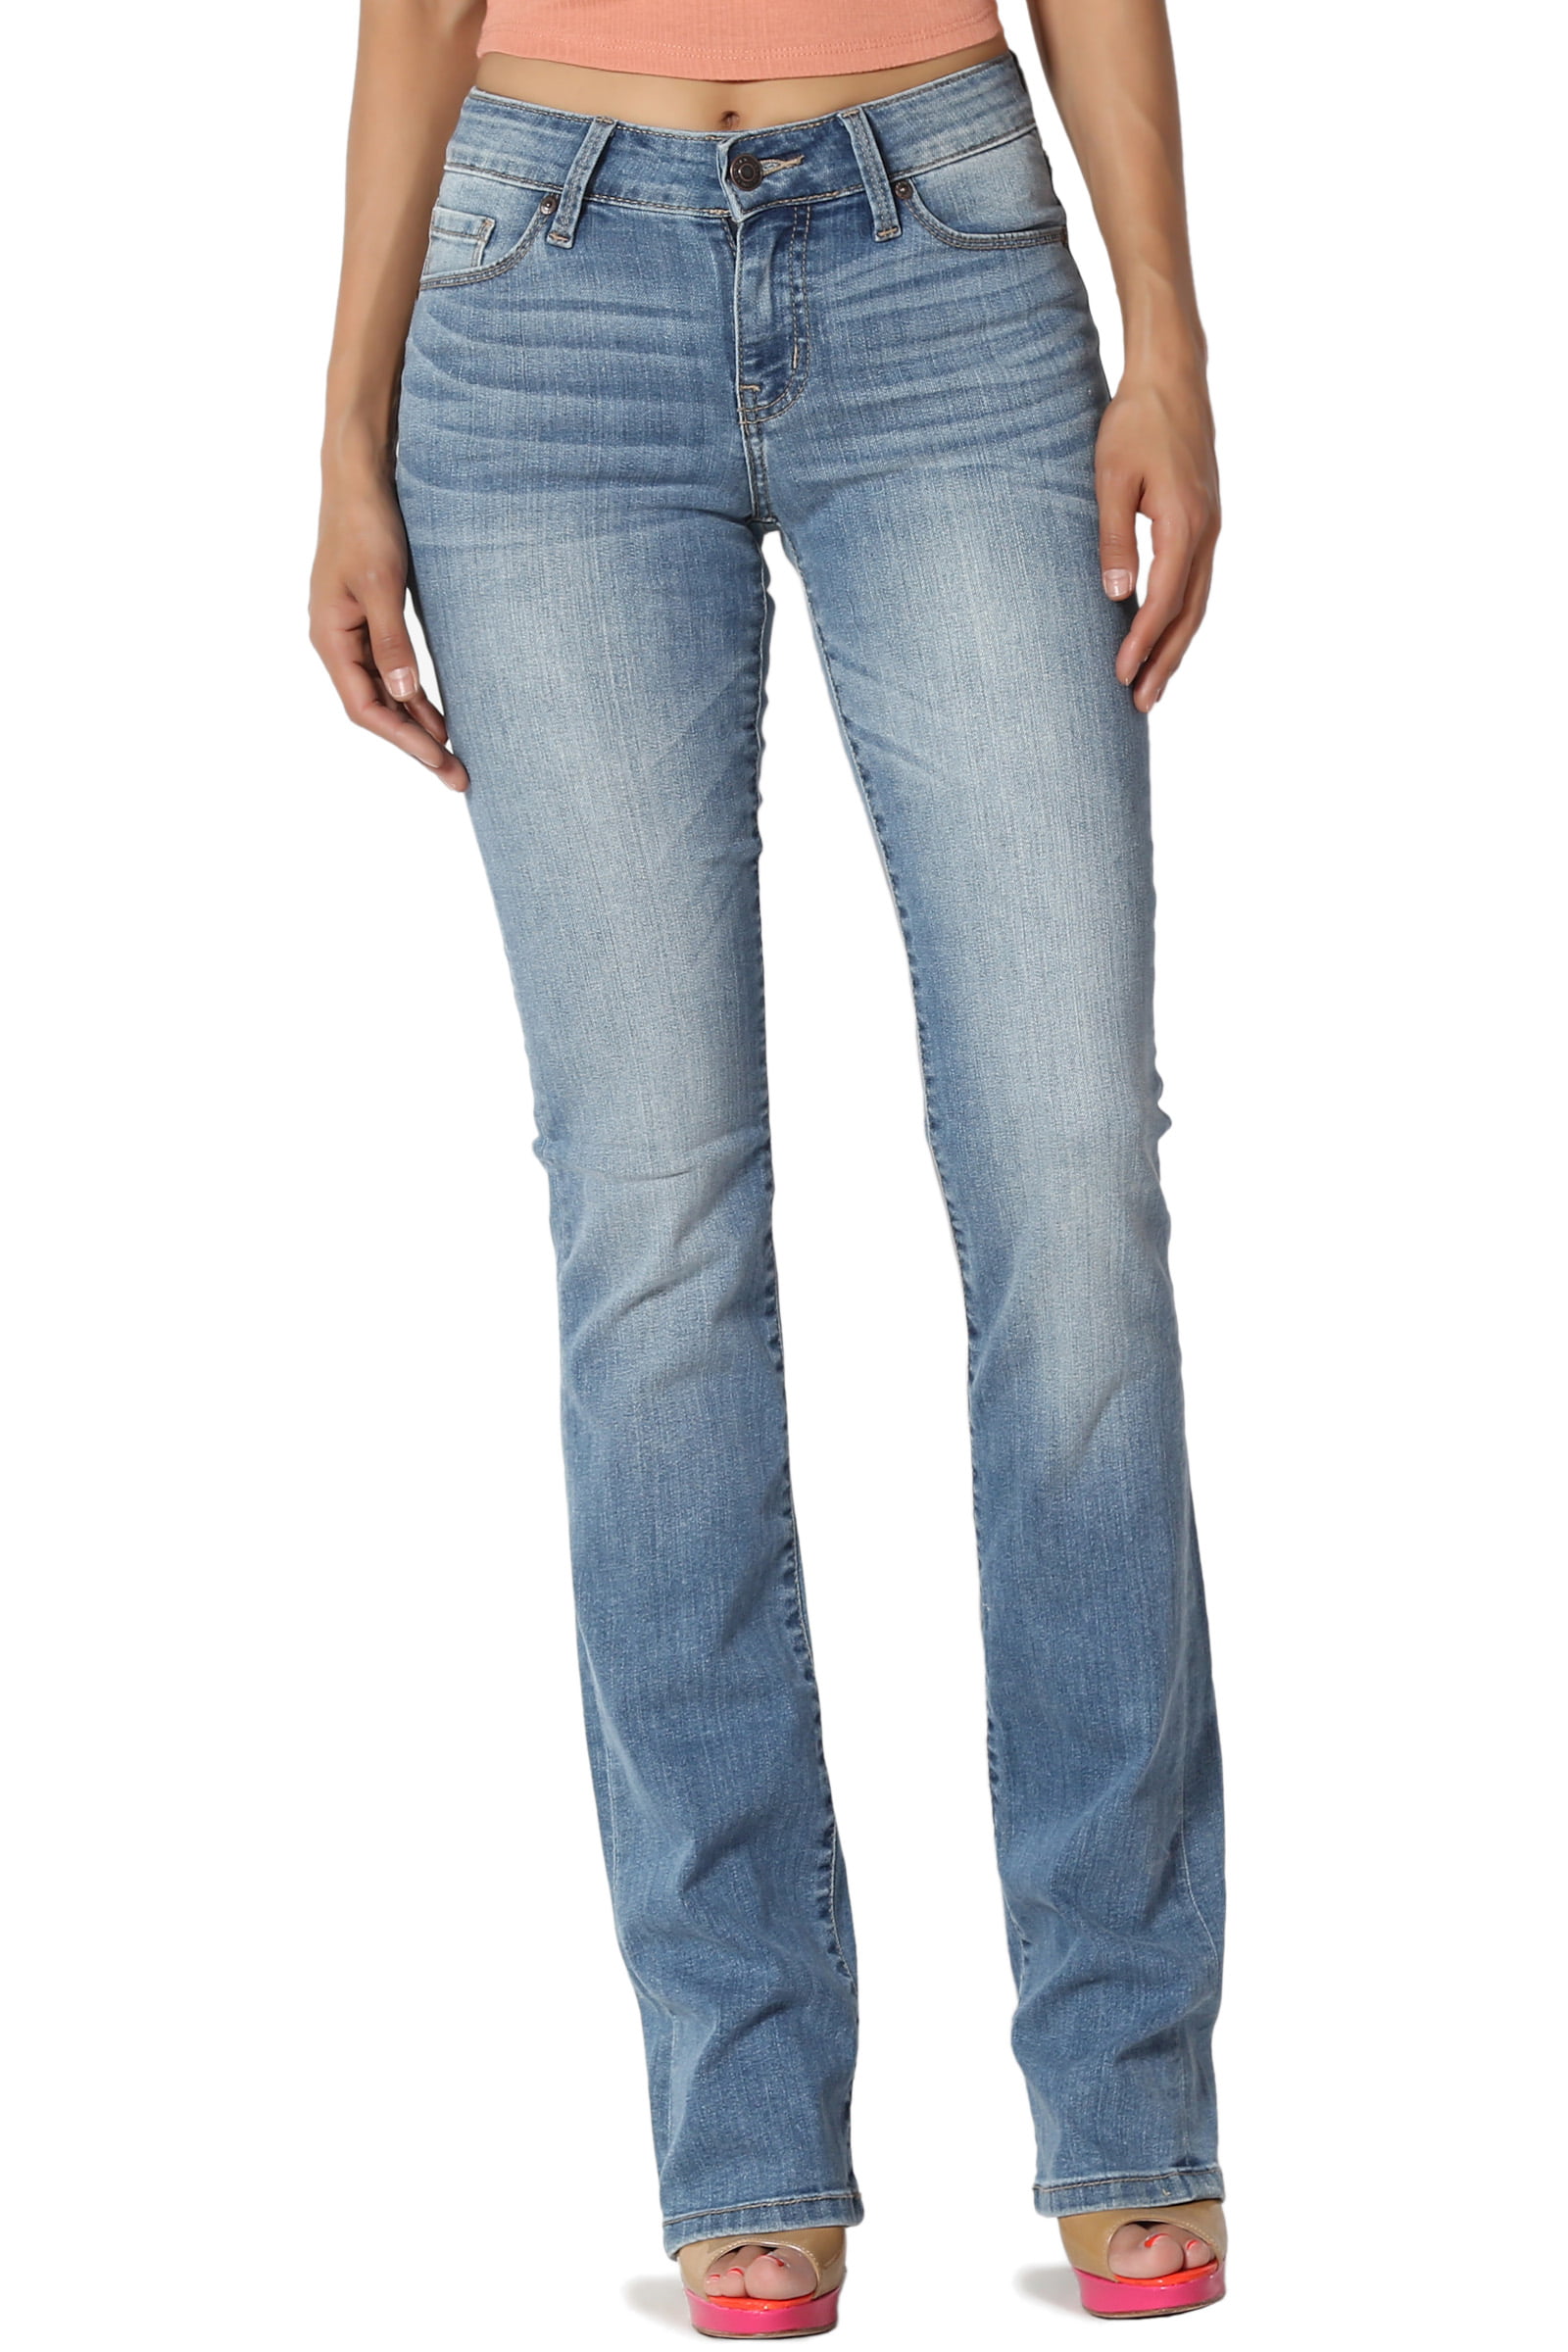 skinny bootcut jeans womens